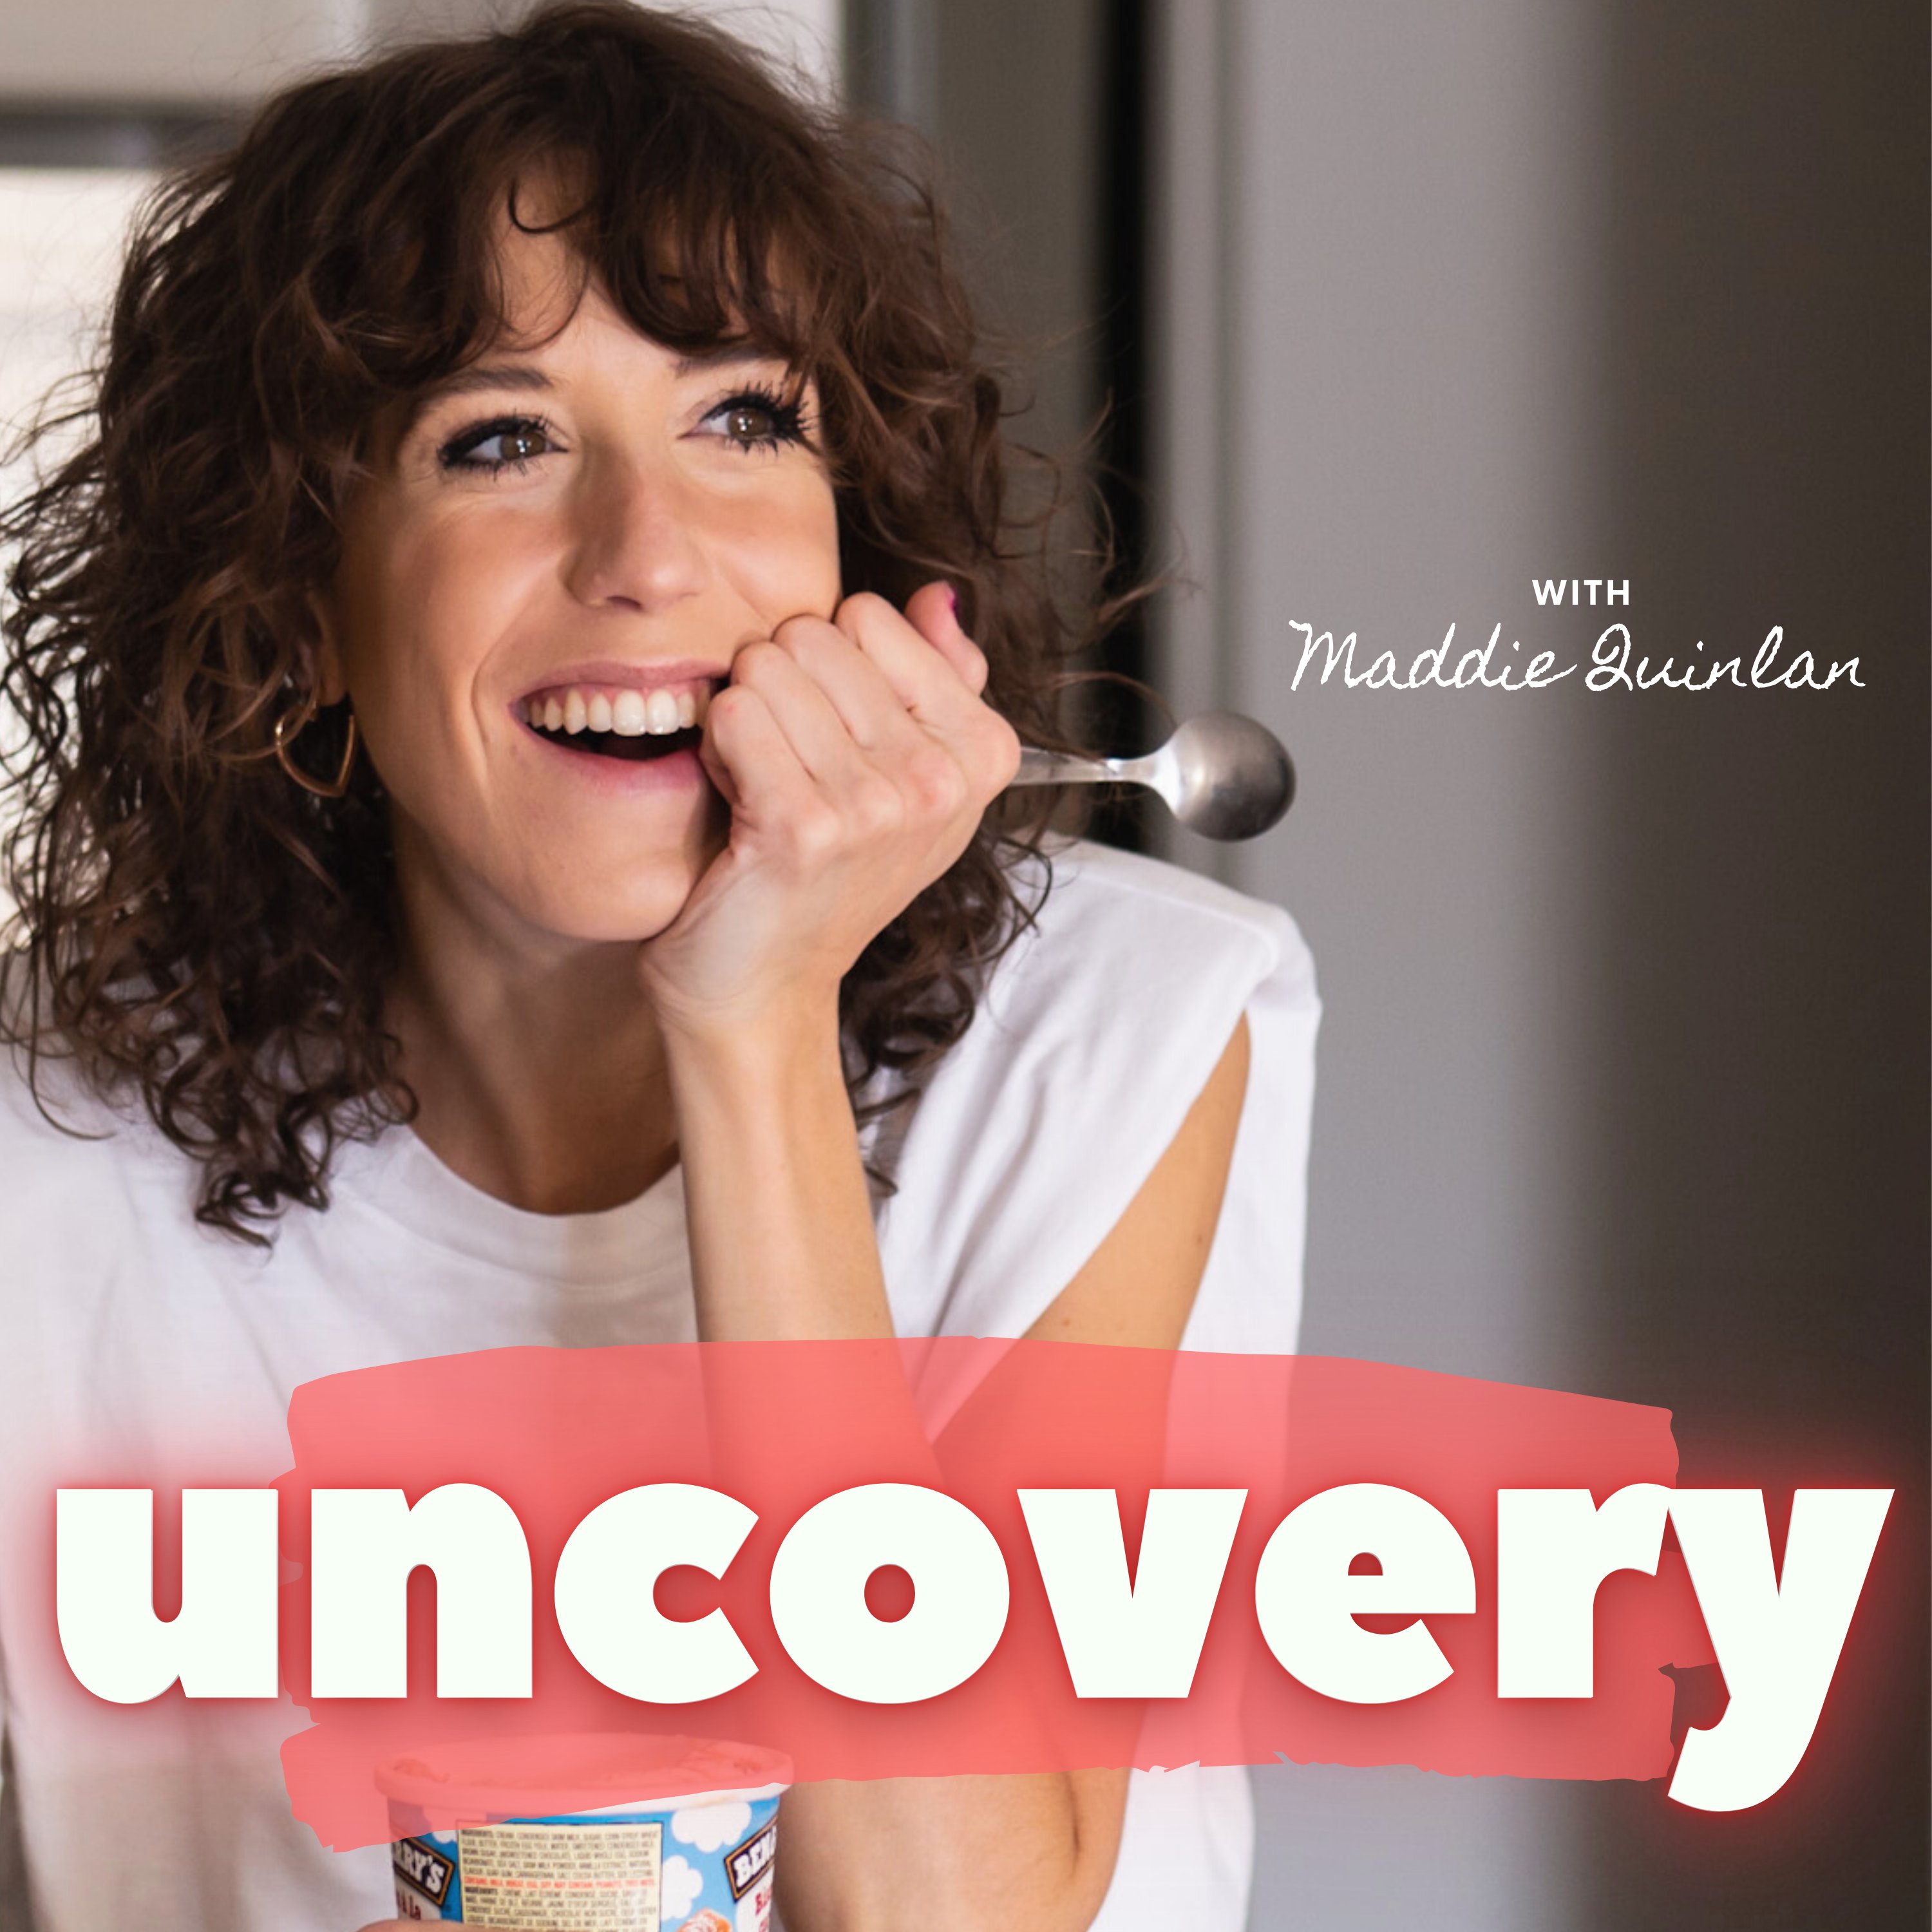 Uncovery podcast with Maddie Quinlan - brunette woman holding ice cream